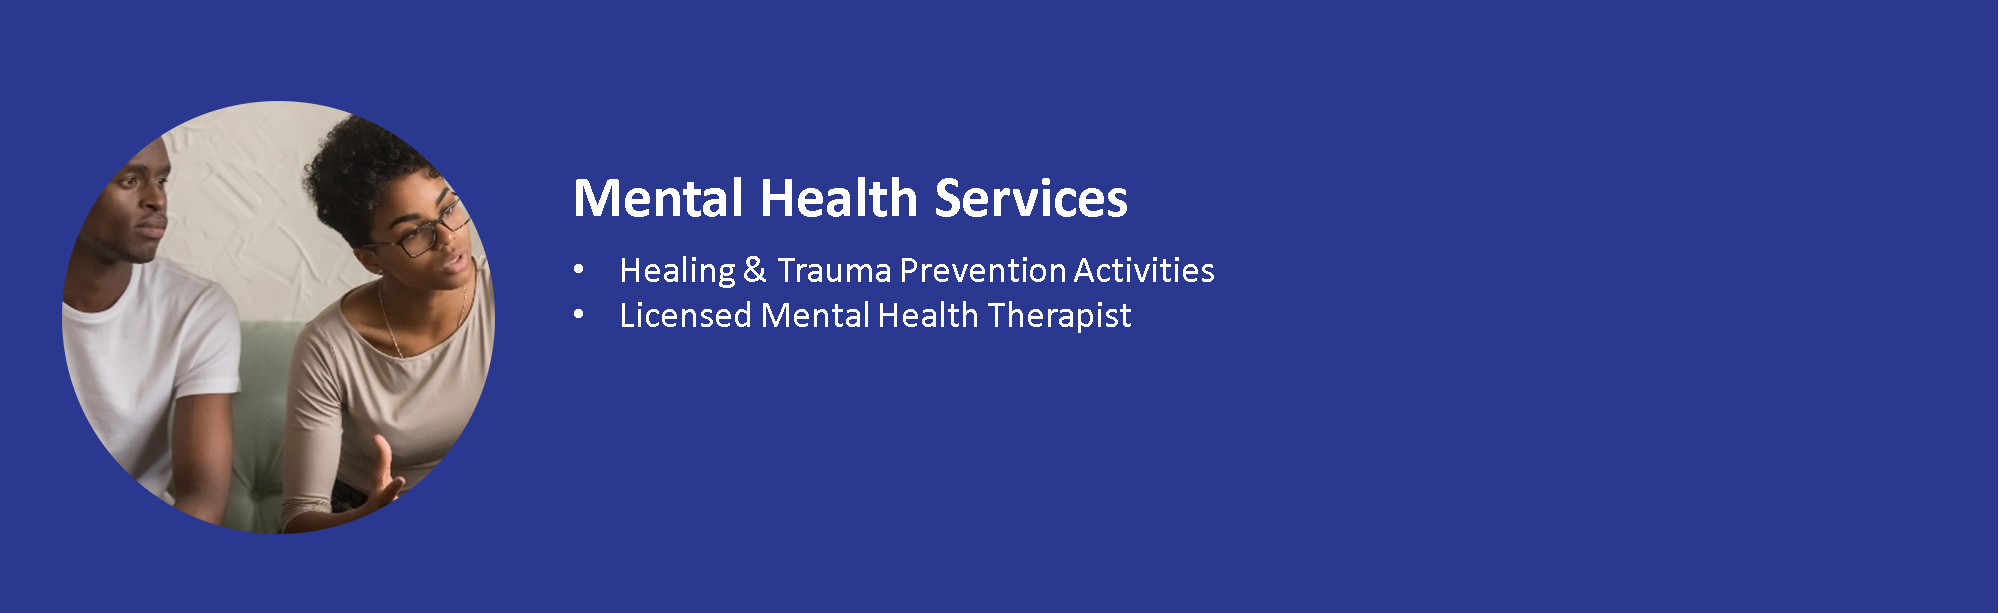 AVWC Mental Health Services